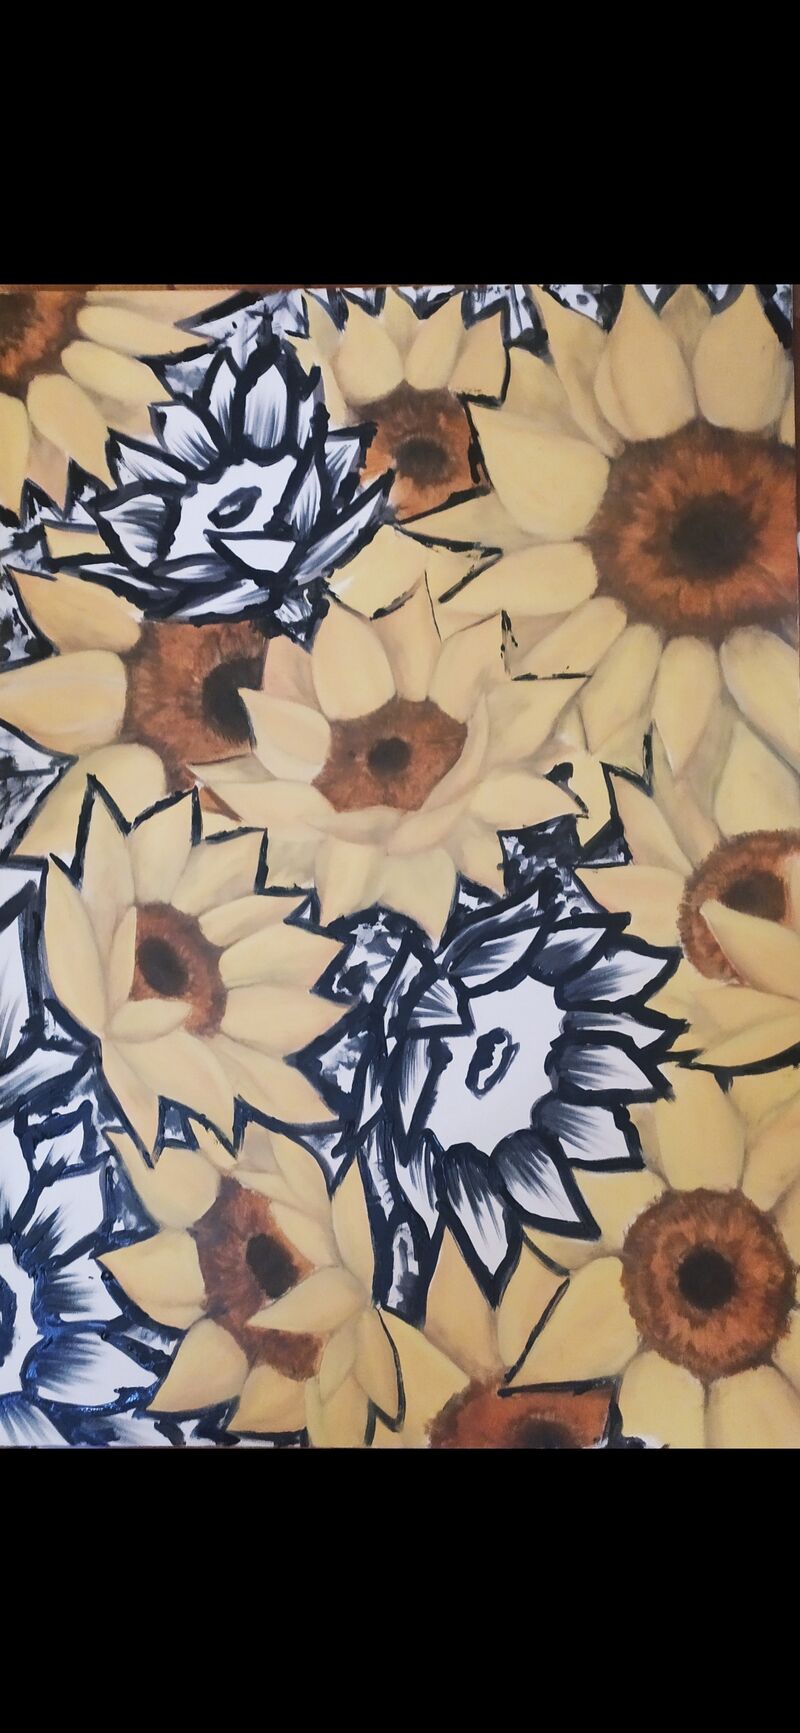 Sunflowers - a Paint by Gabriel Campagna 